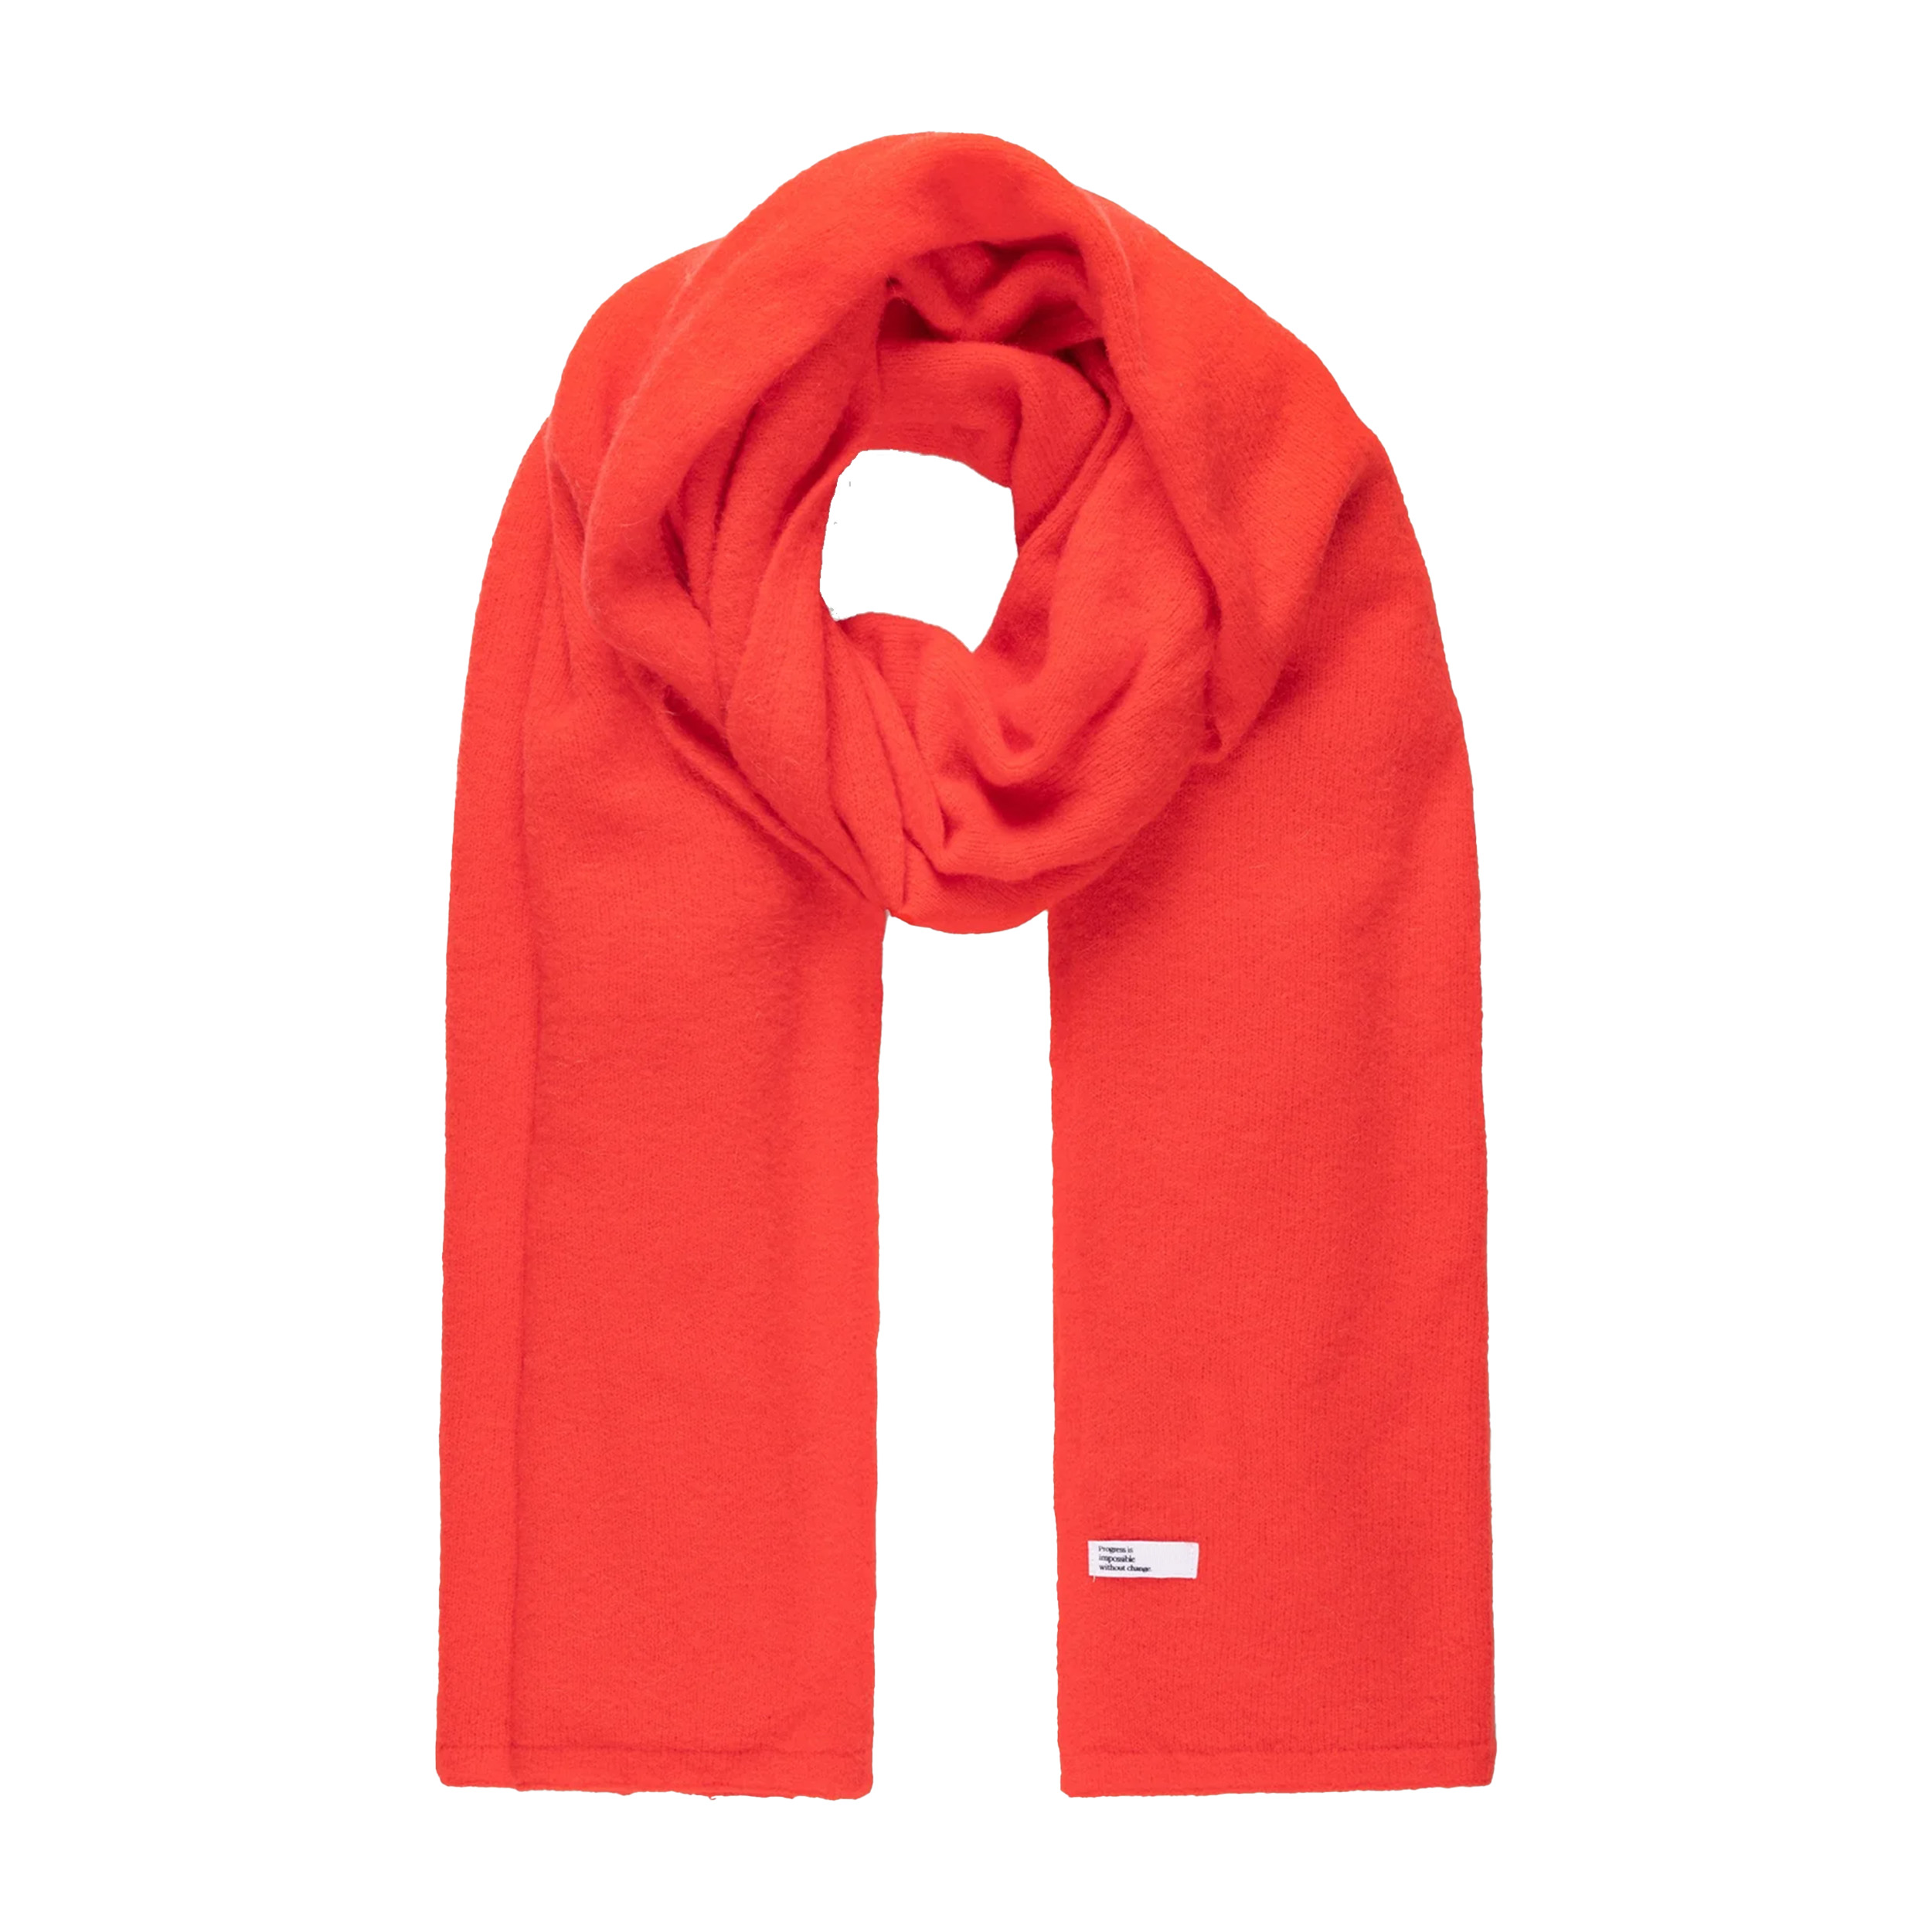 10DAYS Soft Knit Scarf Coral Red